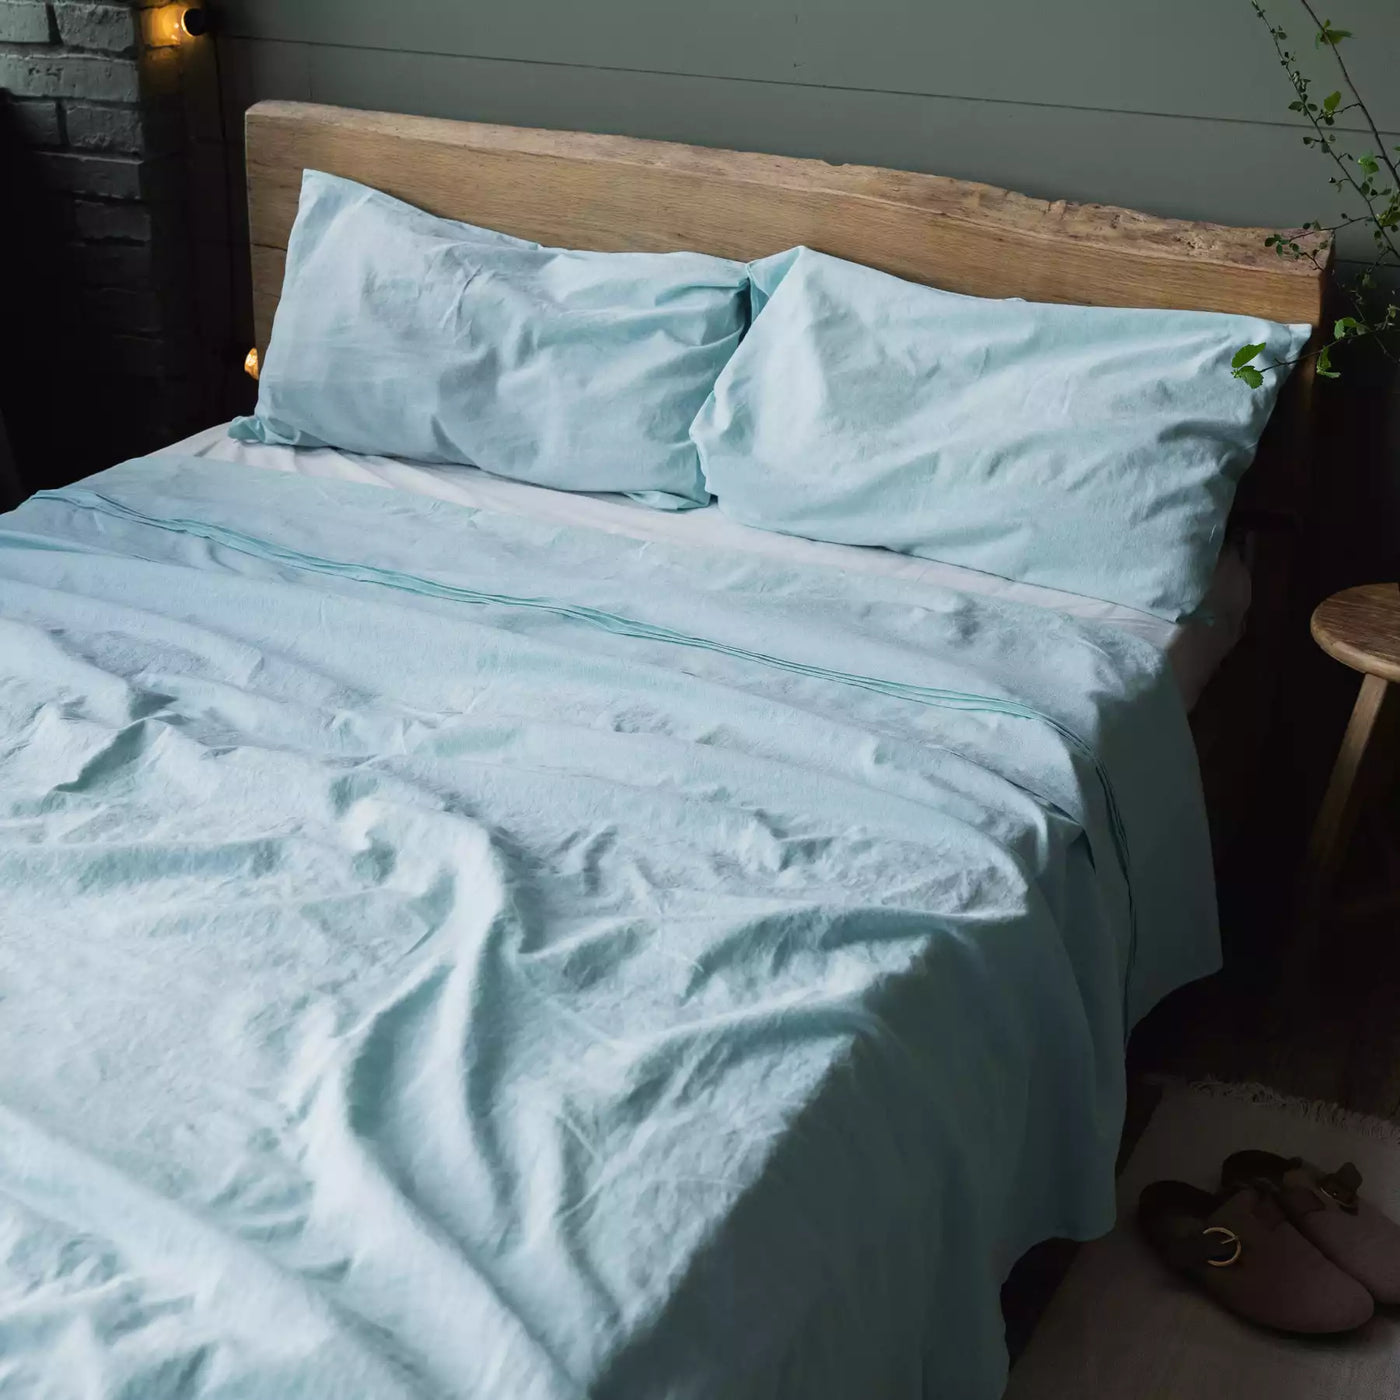 Linen & Cotton Bedding set with Duvet cover 135x200 in Turquoise Melange